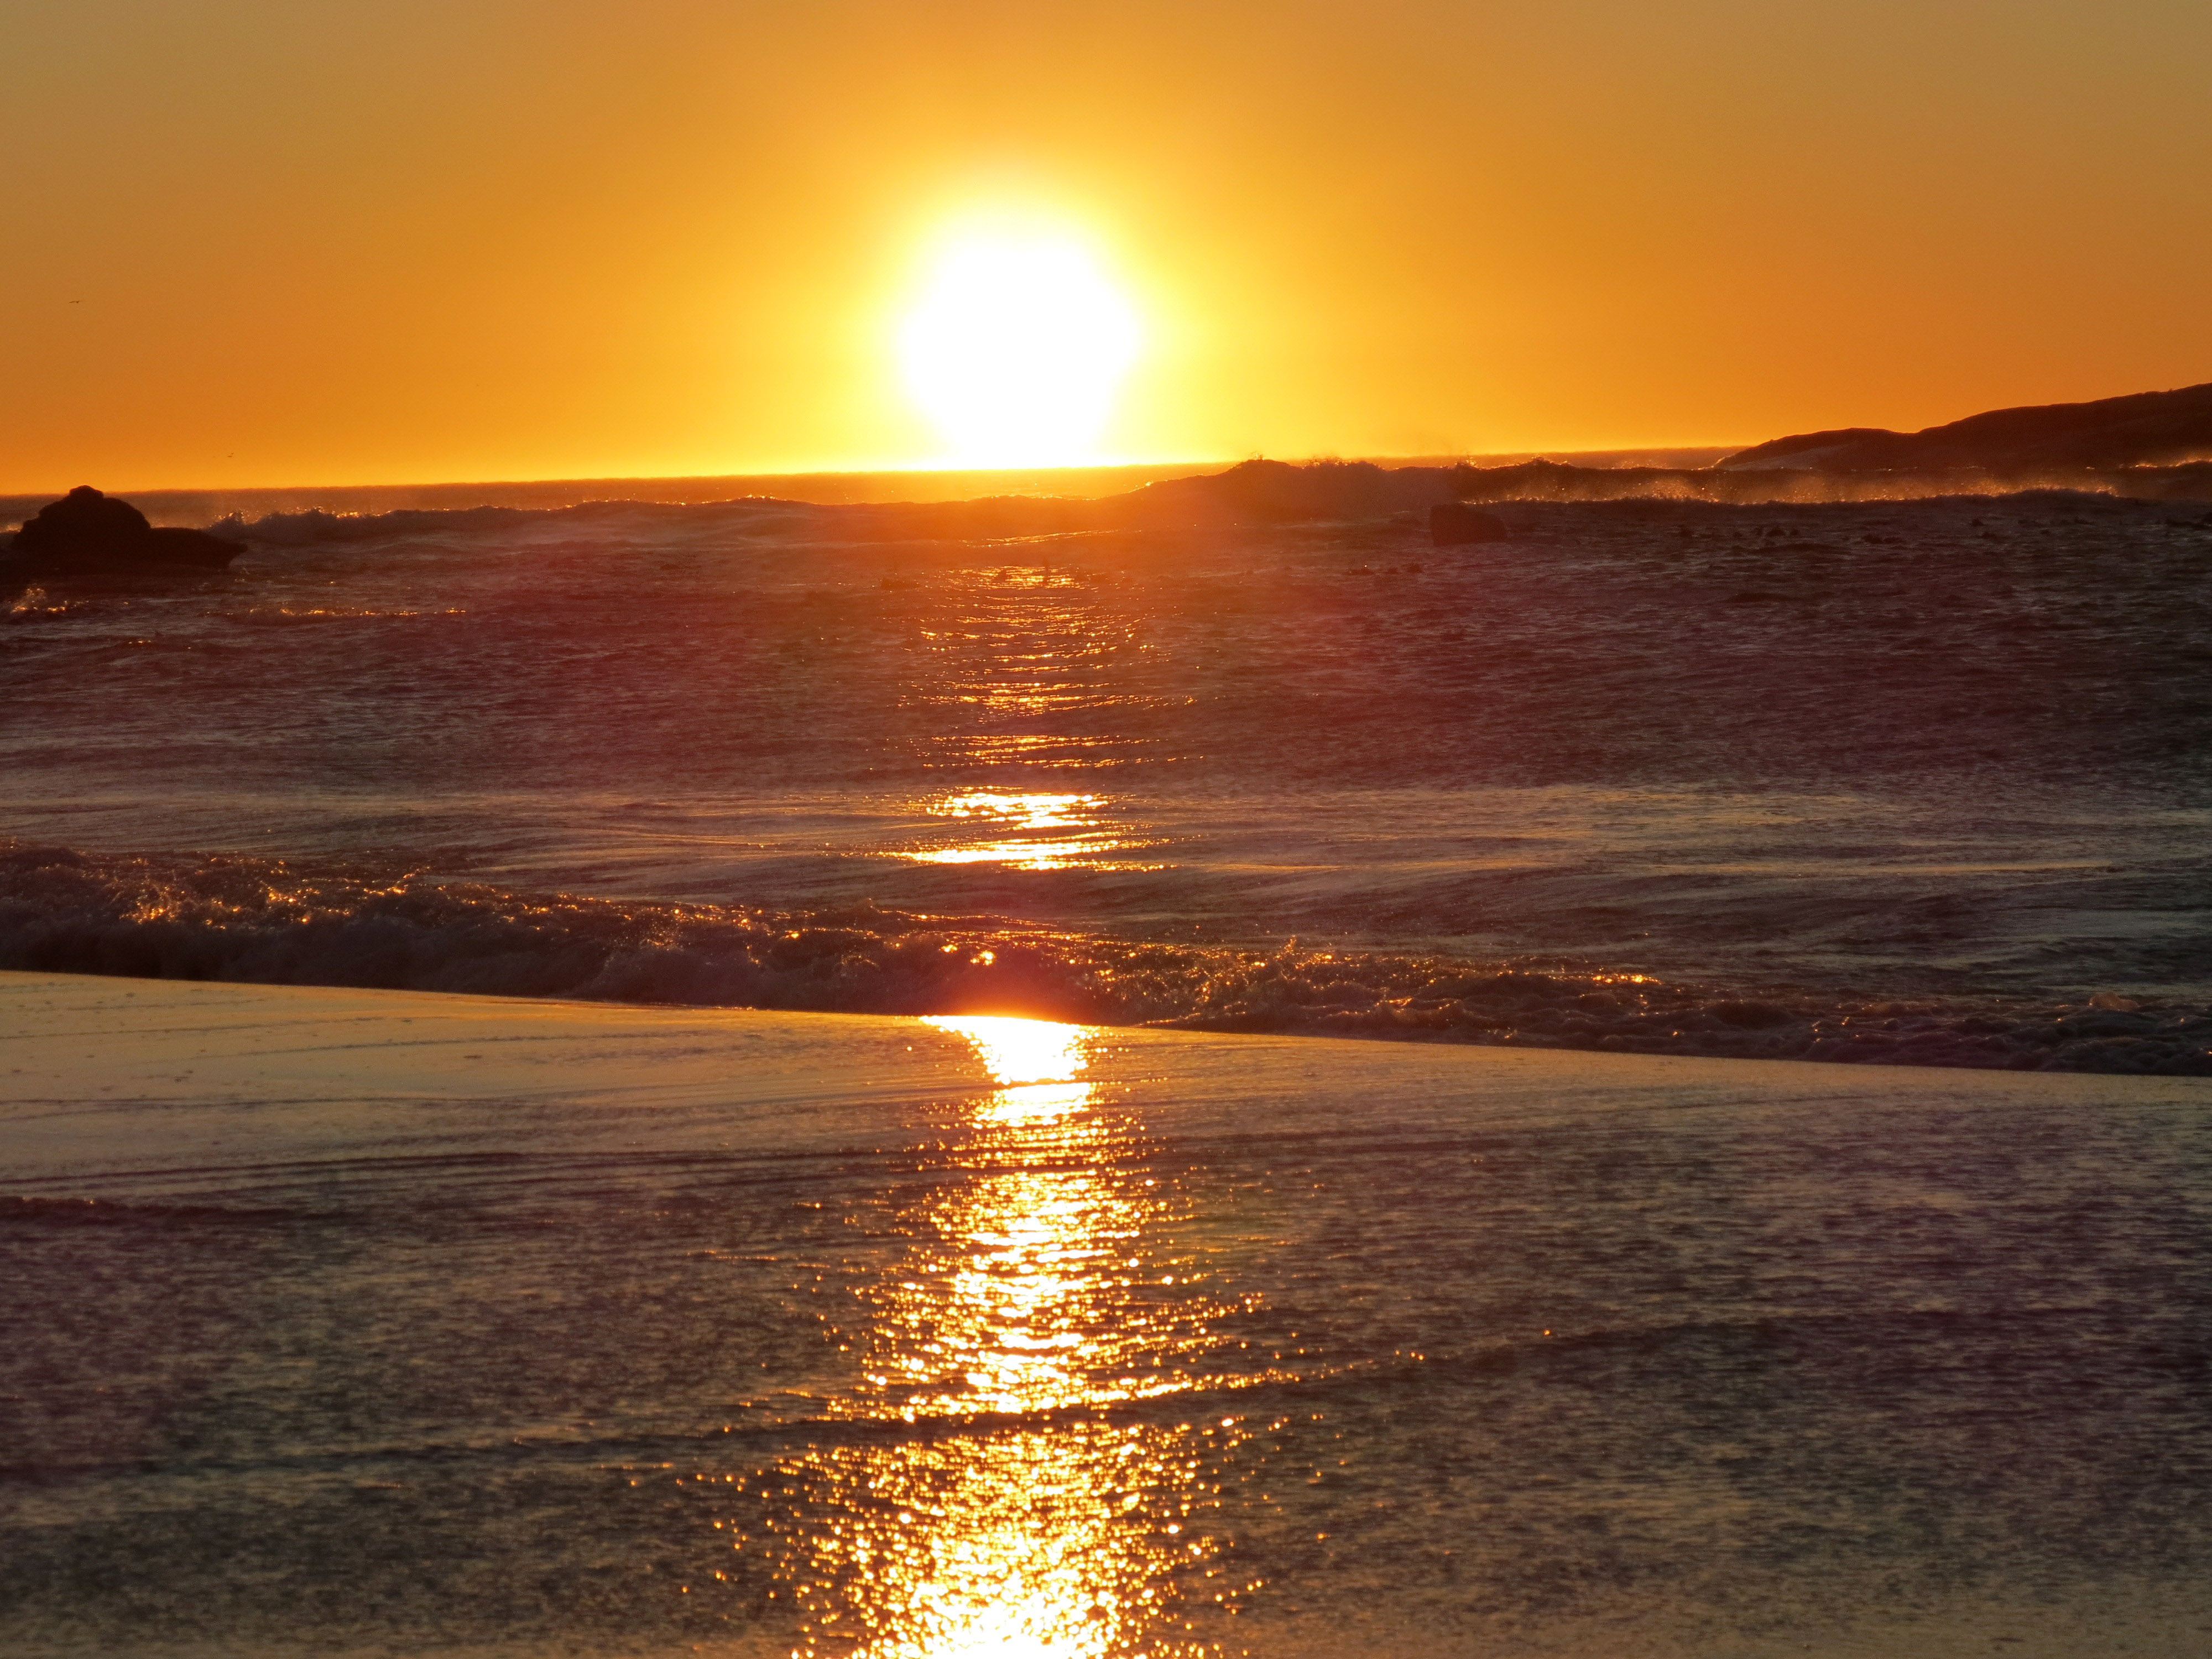 Sunset on the Beach in Cape town, South Africa image - Free stock ...